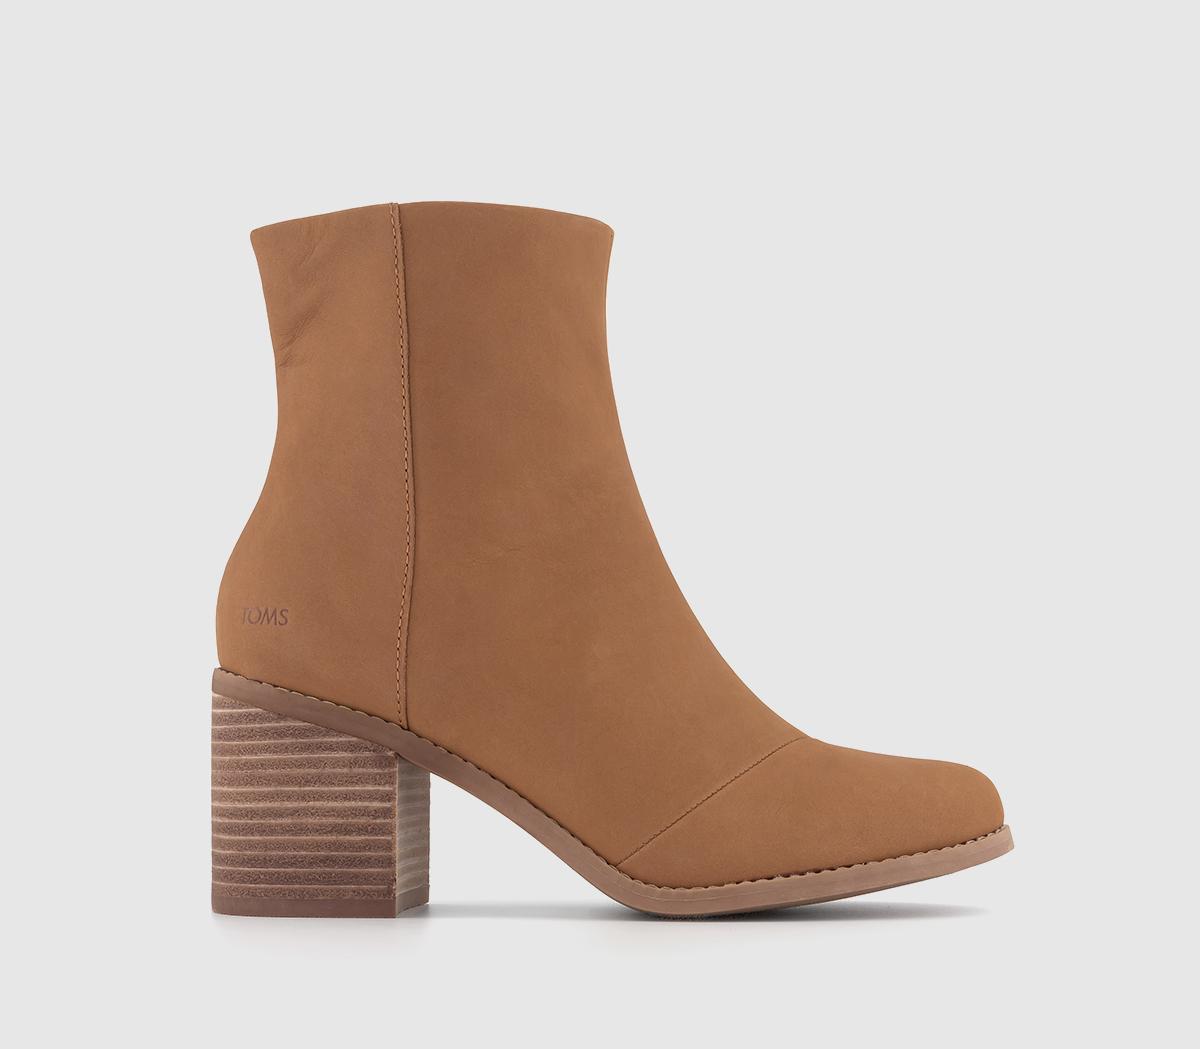 TOMSEvelyn Heeled BootsTan Leather